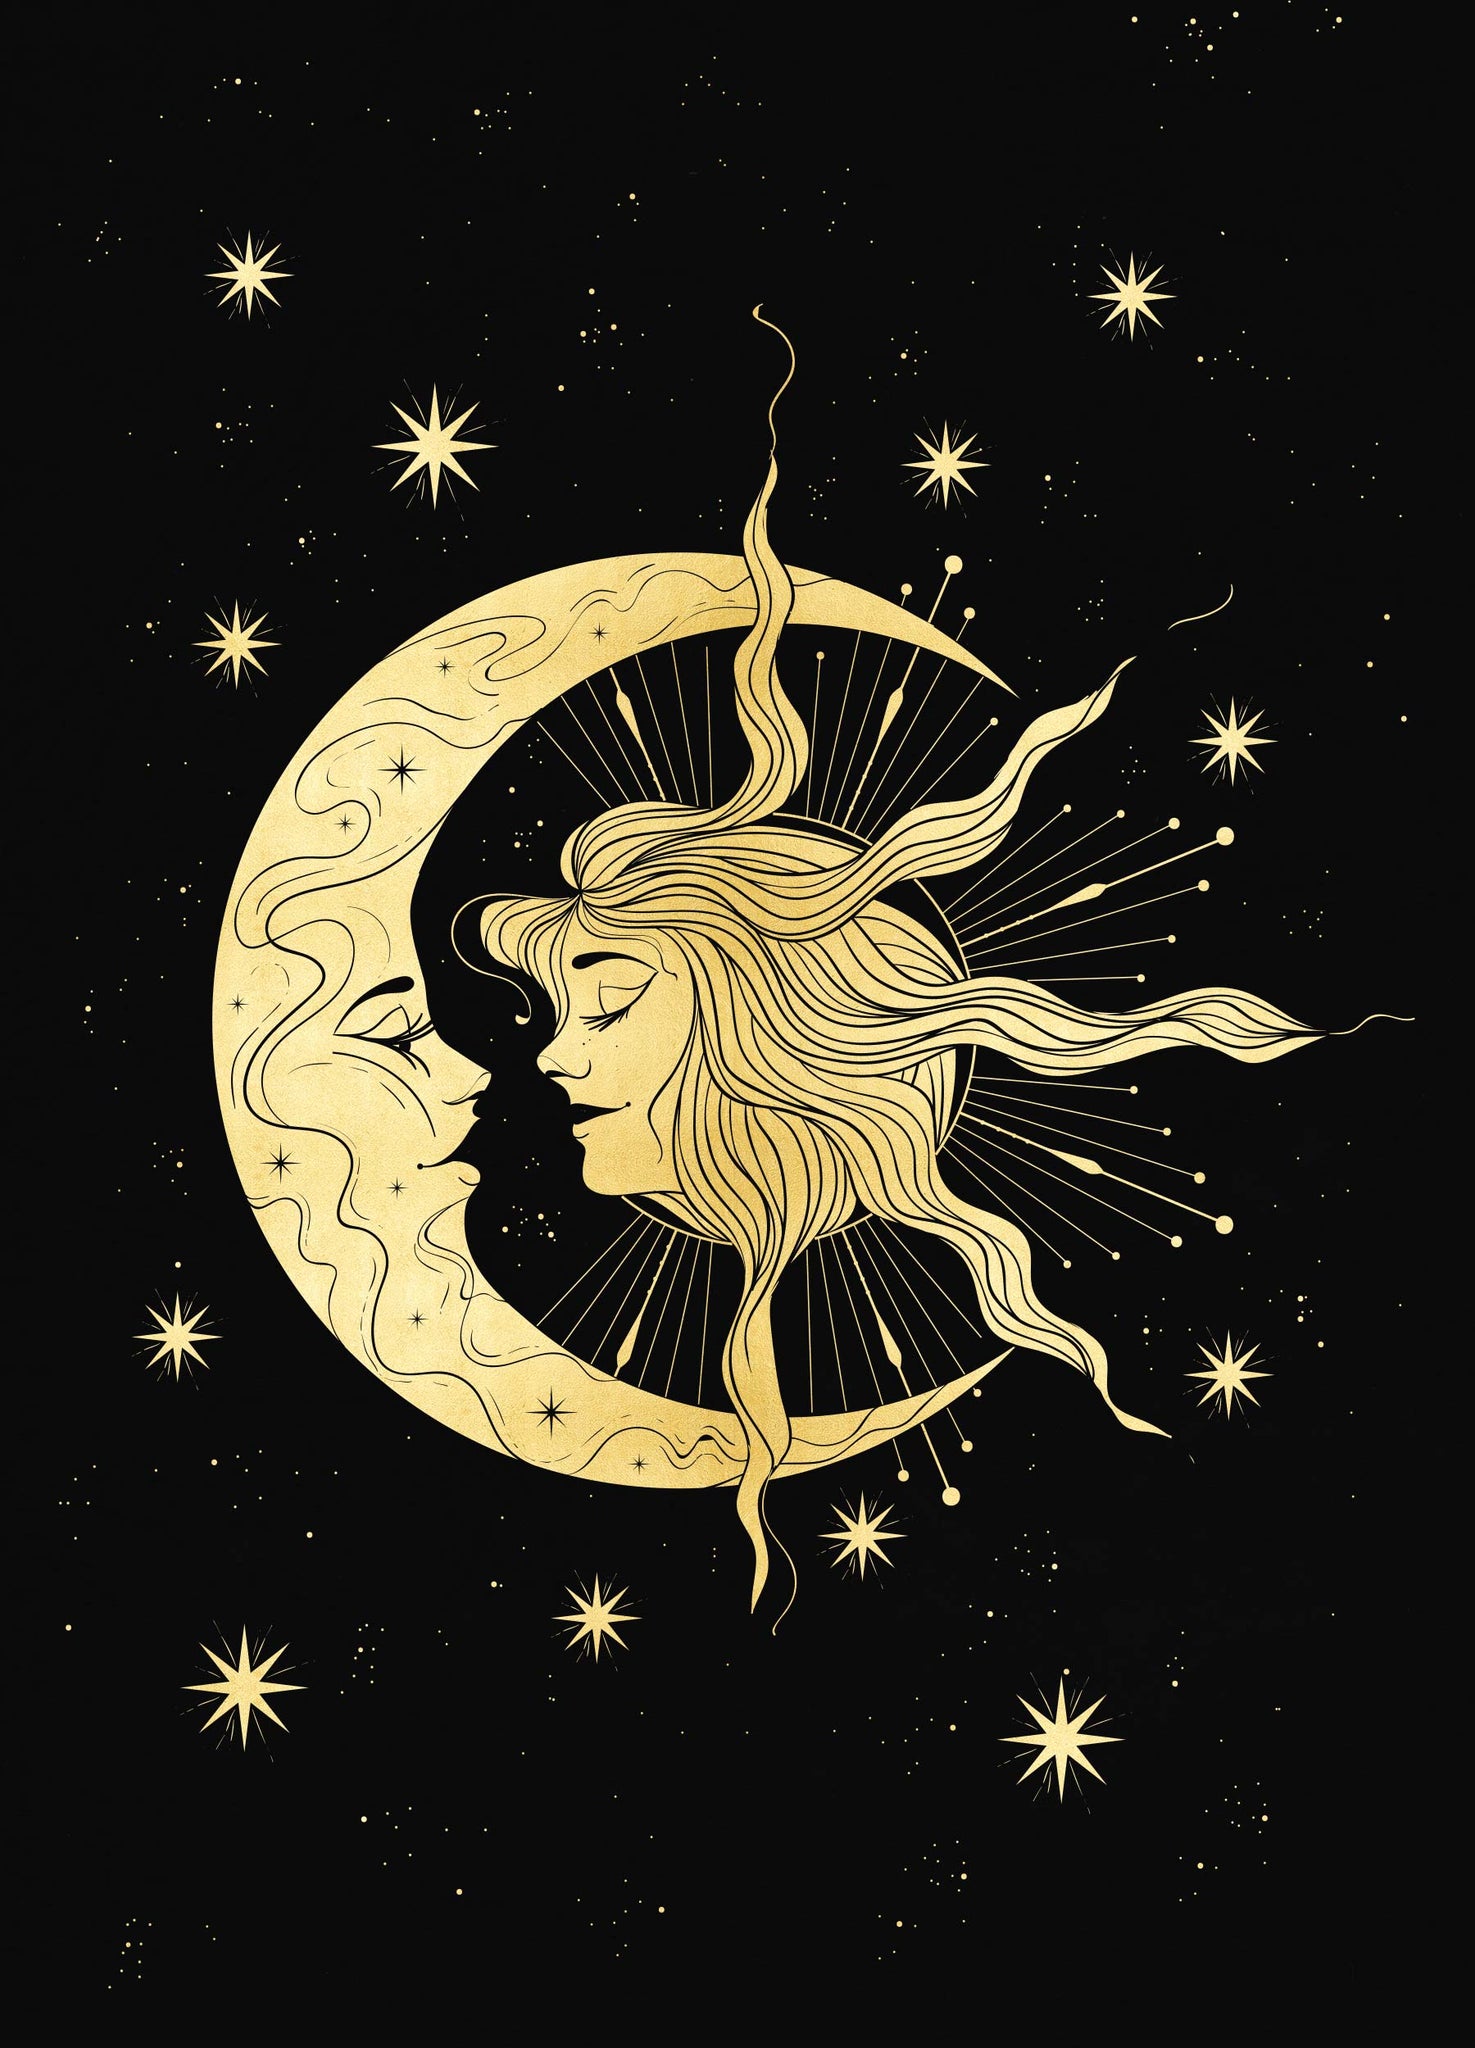 The Lovers Sun & Moon gold foil print on black paper by Cocorrina & Co Shop and Design Studio